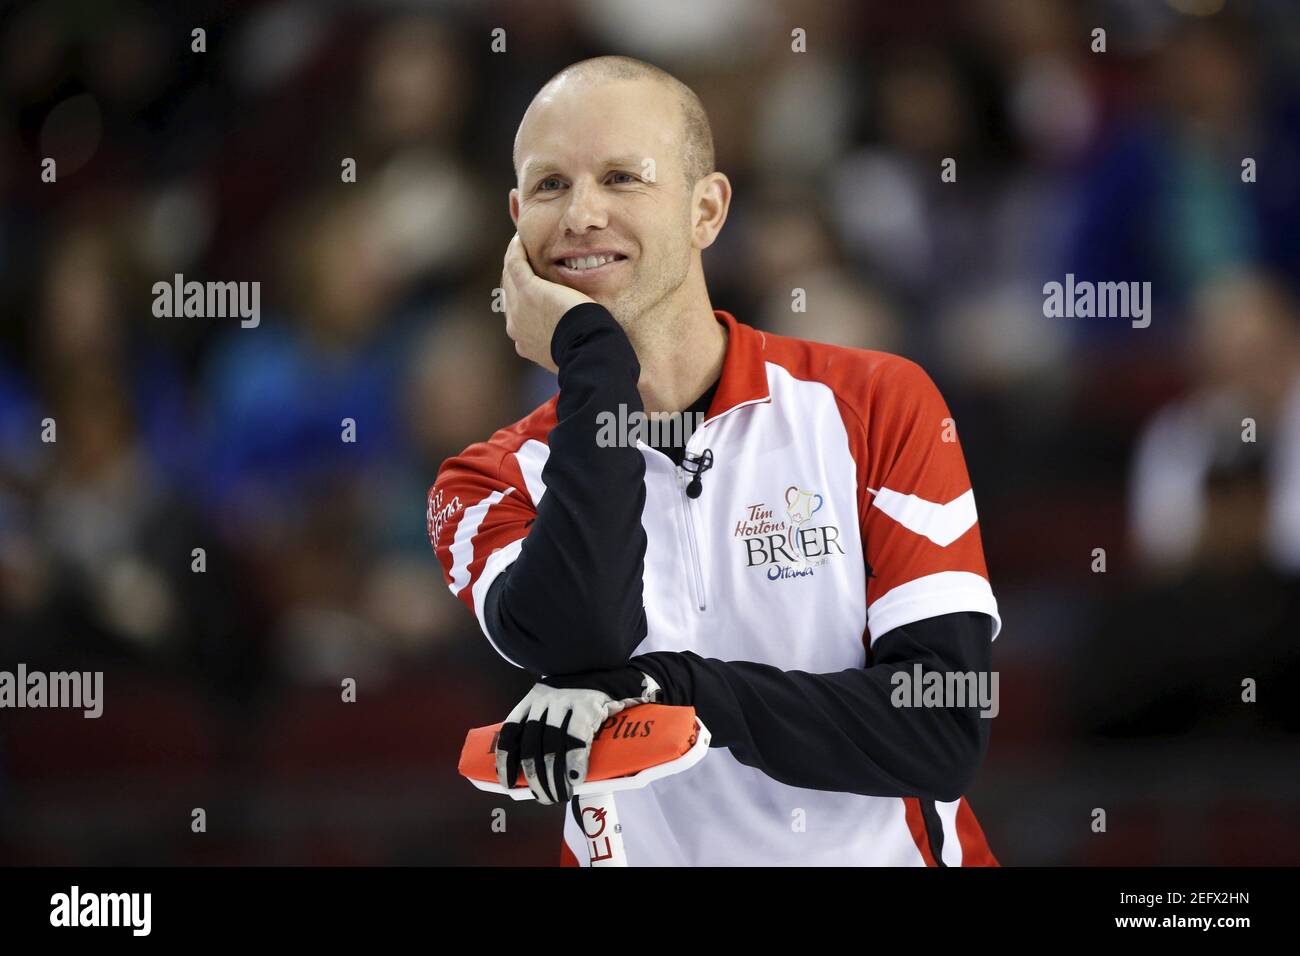 Team Canada skip Pat Simmons looks on during his team's draw against Team British Columbia at the Brier curling championships in Ottawa, Canada, March 8, 2016. REUTERS/Chris Wattie   Picture Supplied by Action Images Stock Photo